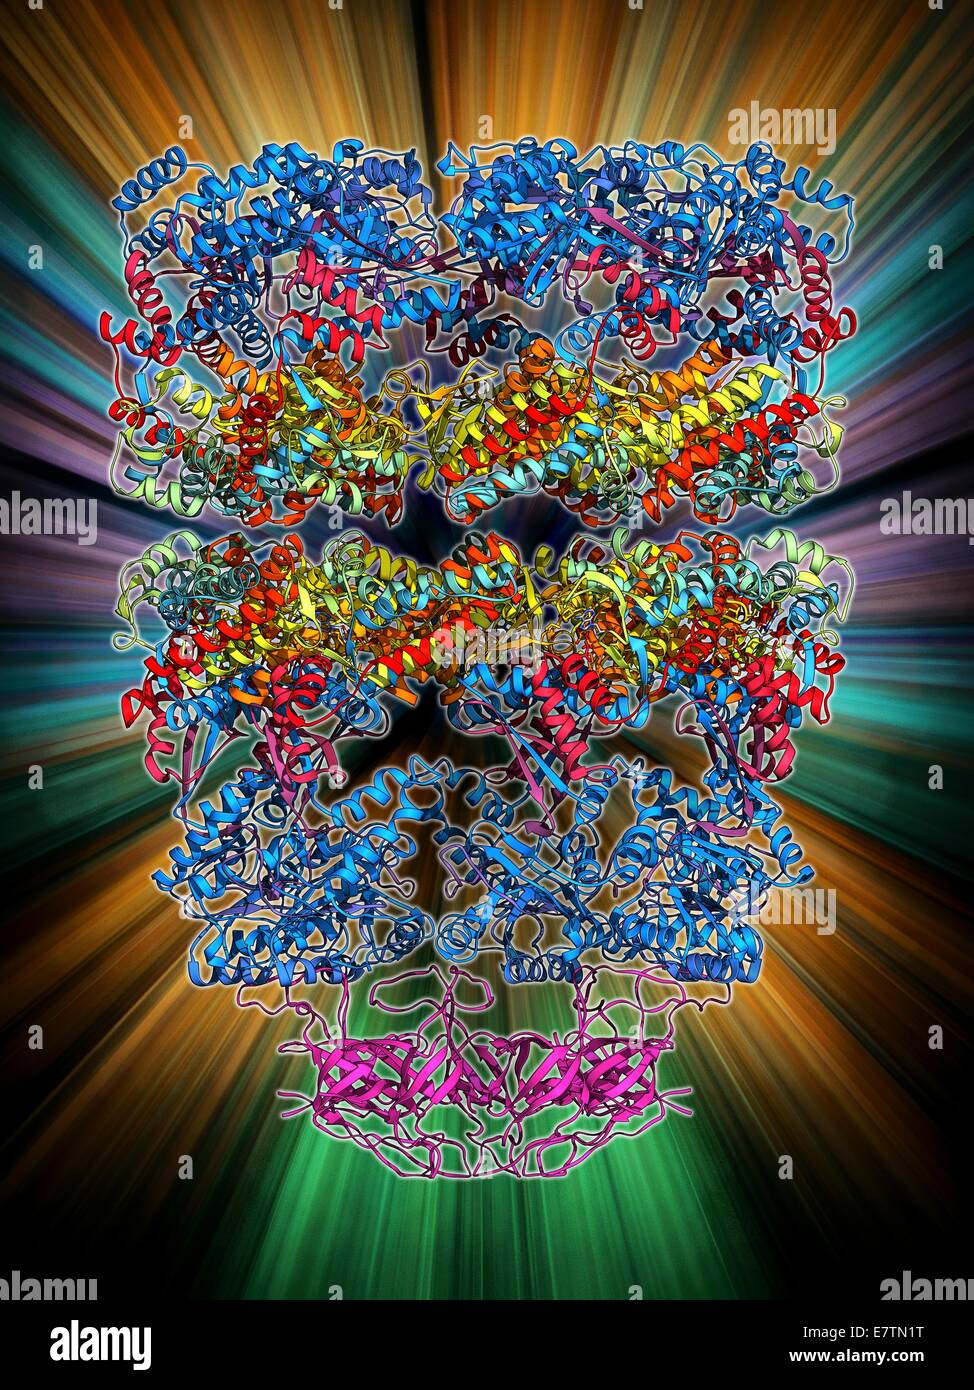 Chaperonin protein complex. Molecular model showing the structure of a GroEL GroES (ADP)7 chaperonin complex. Chaperonins are proteins that provide favourable conditions for the correct folding of other proteins, thus preventing aggregation (clumping) due Stock Photo